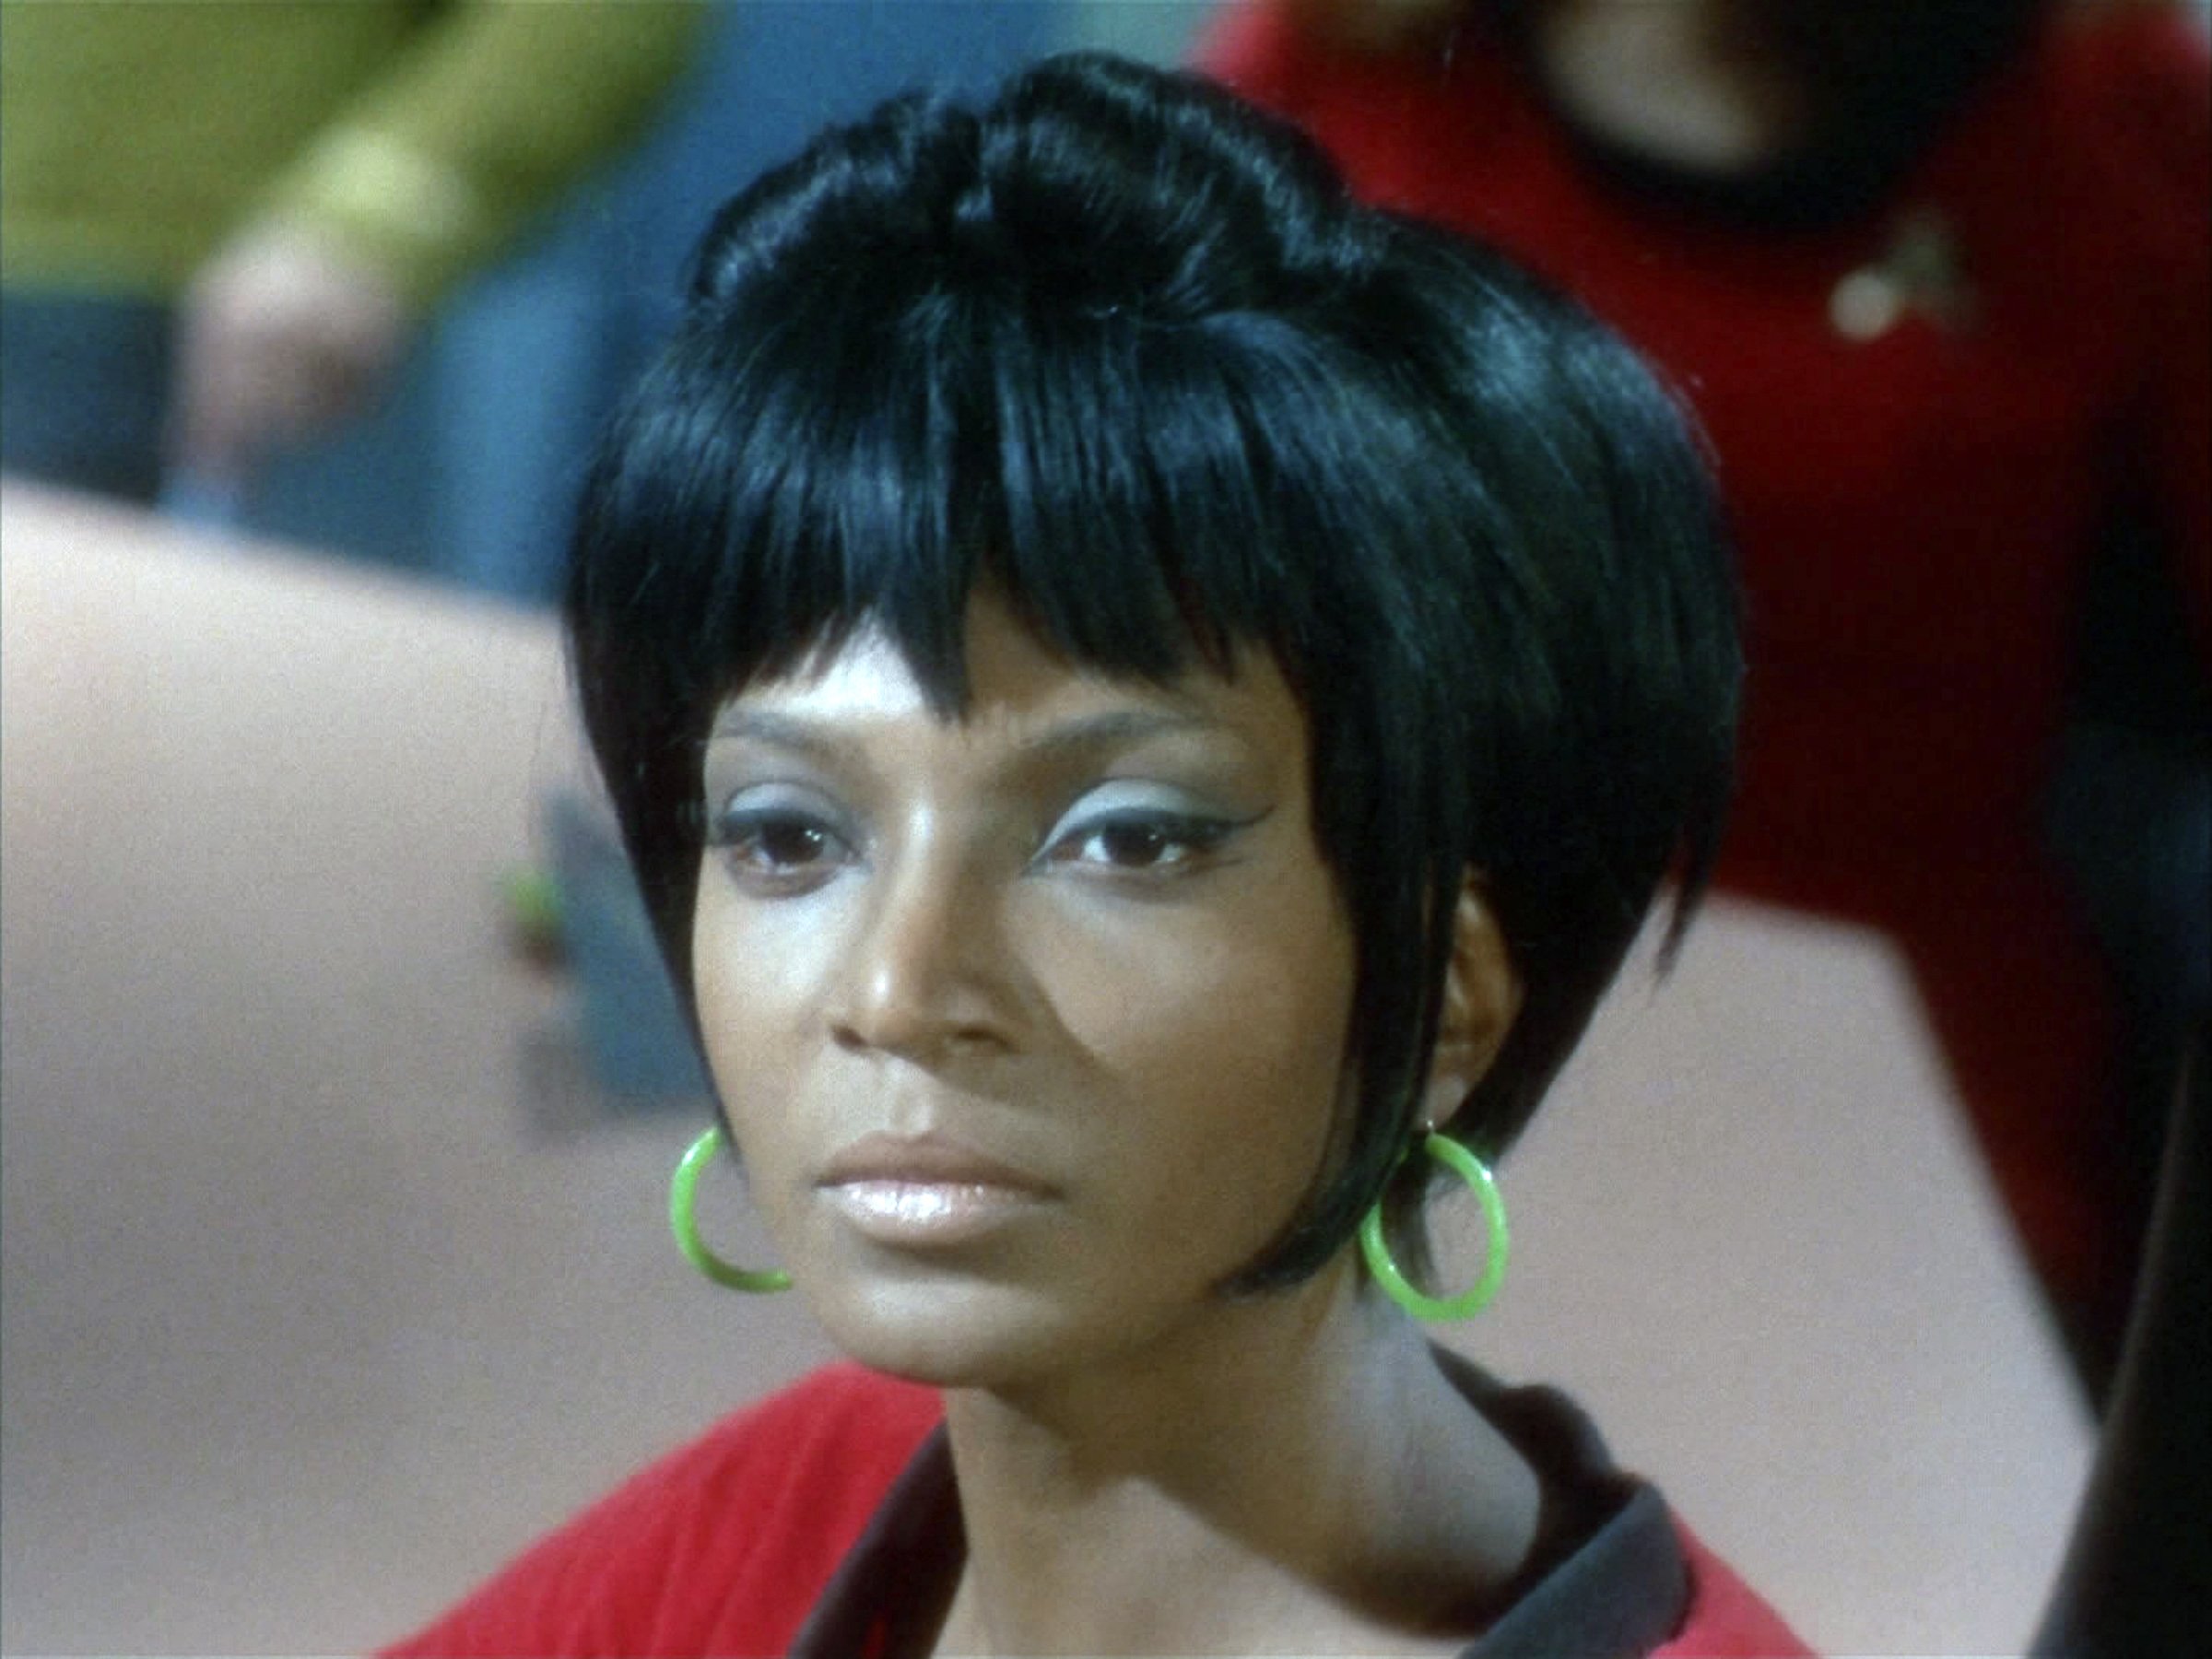 Nichelle Nichols as Lt. Uhura on the Star Trek: The Original Series episode "Space Seed." Original air date February 16, 1967.| Source: Getty Images 